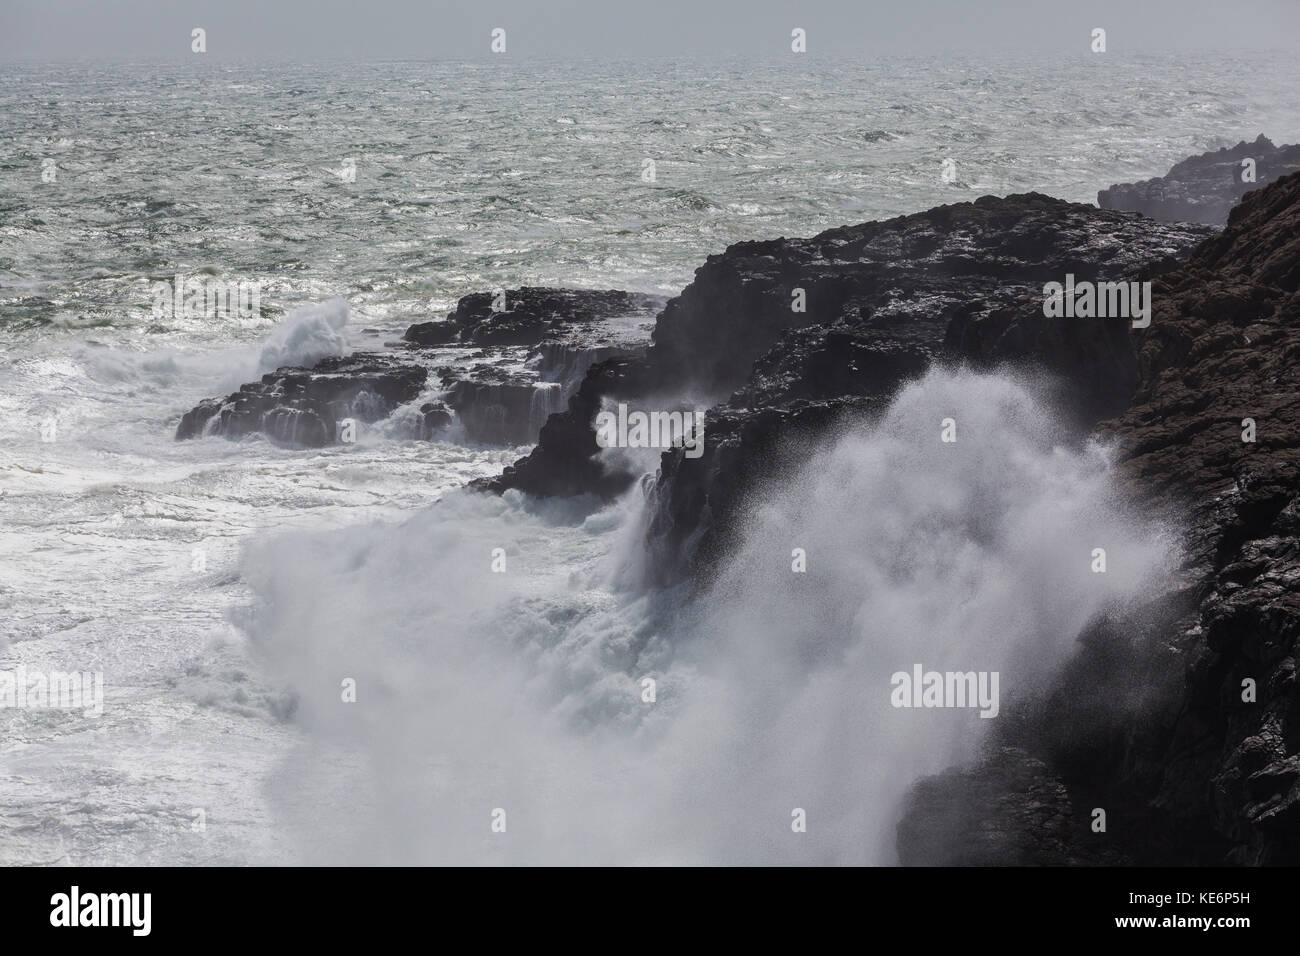 Waves breaking hard on rocks - extreme force of nature Stock Photo